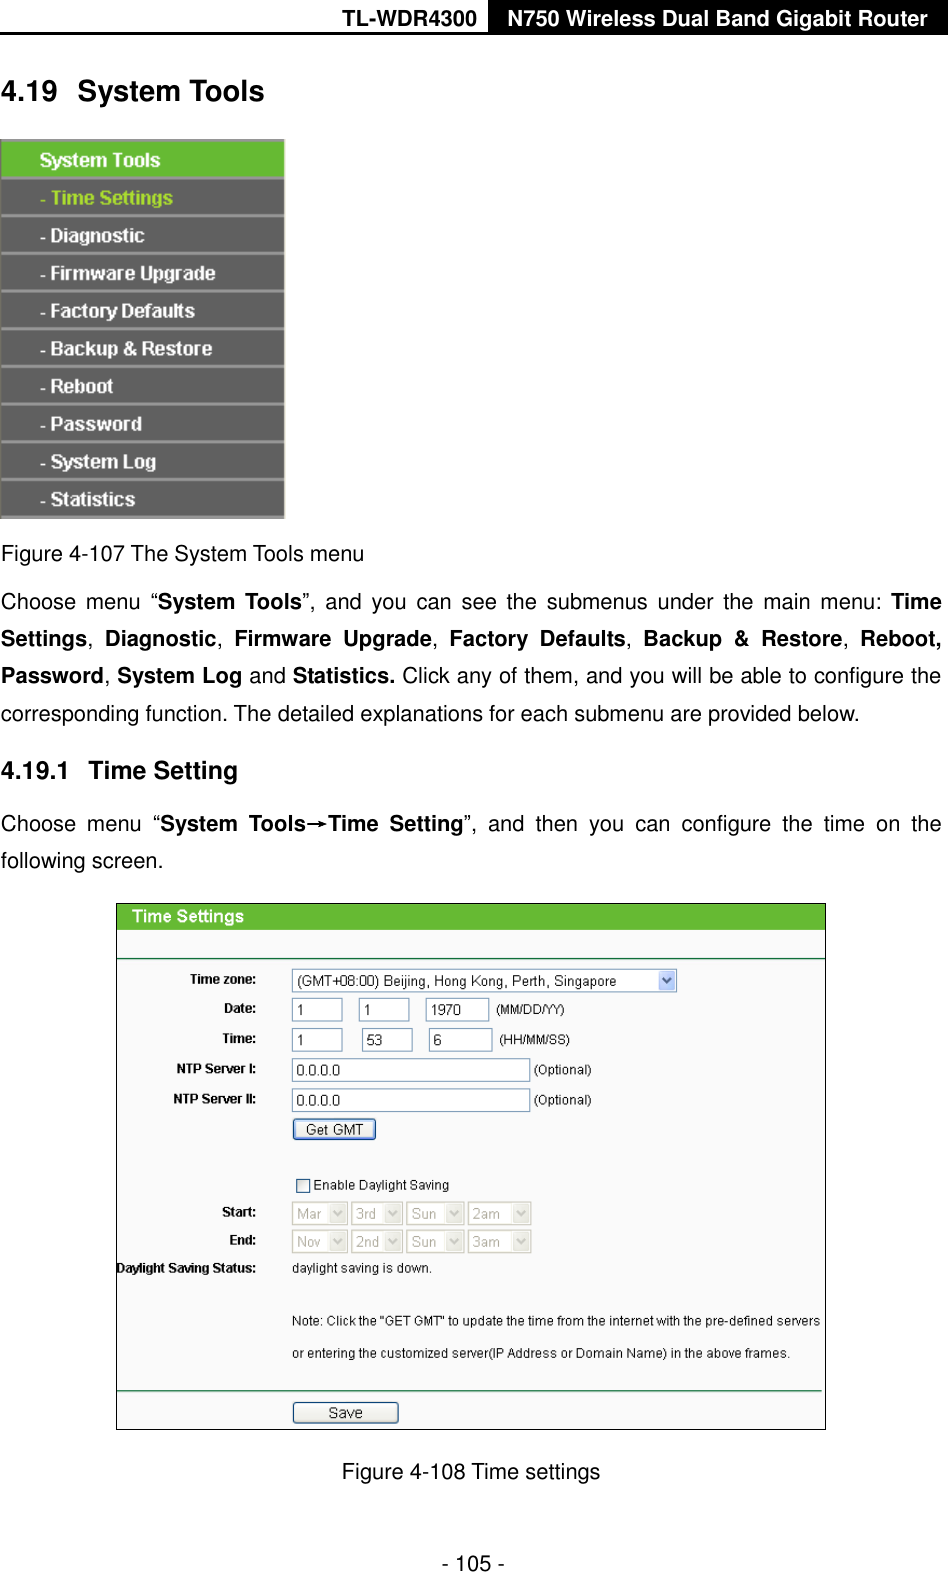 TL-WDR4300 N750 Wireless Dual Band Gigabit Router  - 105 - 4.19  System Tools  Figure 4-107 The System Tools menu Choose menu  “System Tools”,  and  you  can see  the  submenus  under the  main  menu: Time Settings,  Diagnostic,  Firmware  Upgrade,  Factory  Defaults,  Backup  &amp;  Restore,  Reboot, Password, System Log and Statistics. Click any of them, and you will be able to configure the corresponding function. The detailed explanations for each submenu are provided below. 4.19.1  Time Setting Choose  menu  “System  Tools→Time  Setting”,  and  then  you  can  configure  the  time  on  the following screen.  Figure 4-108 Time settings 